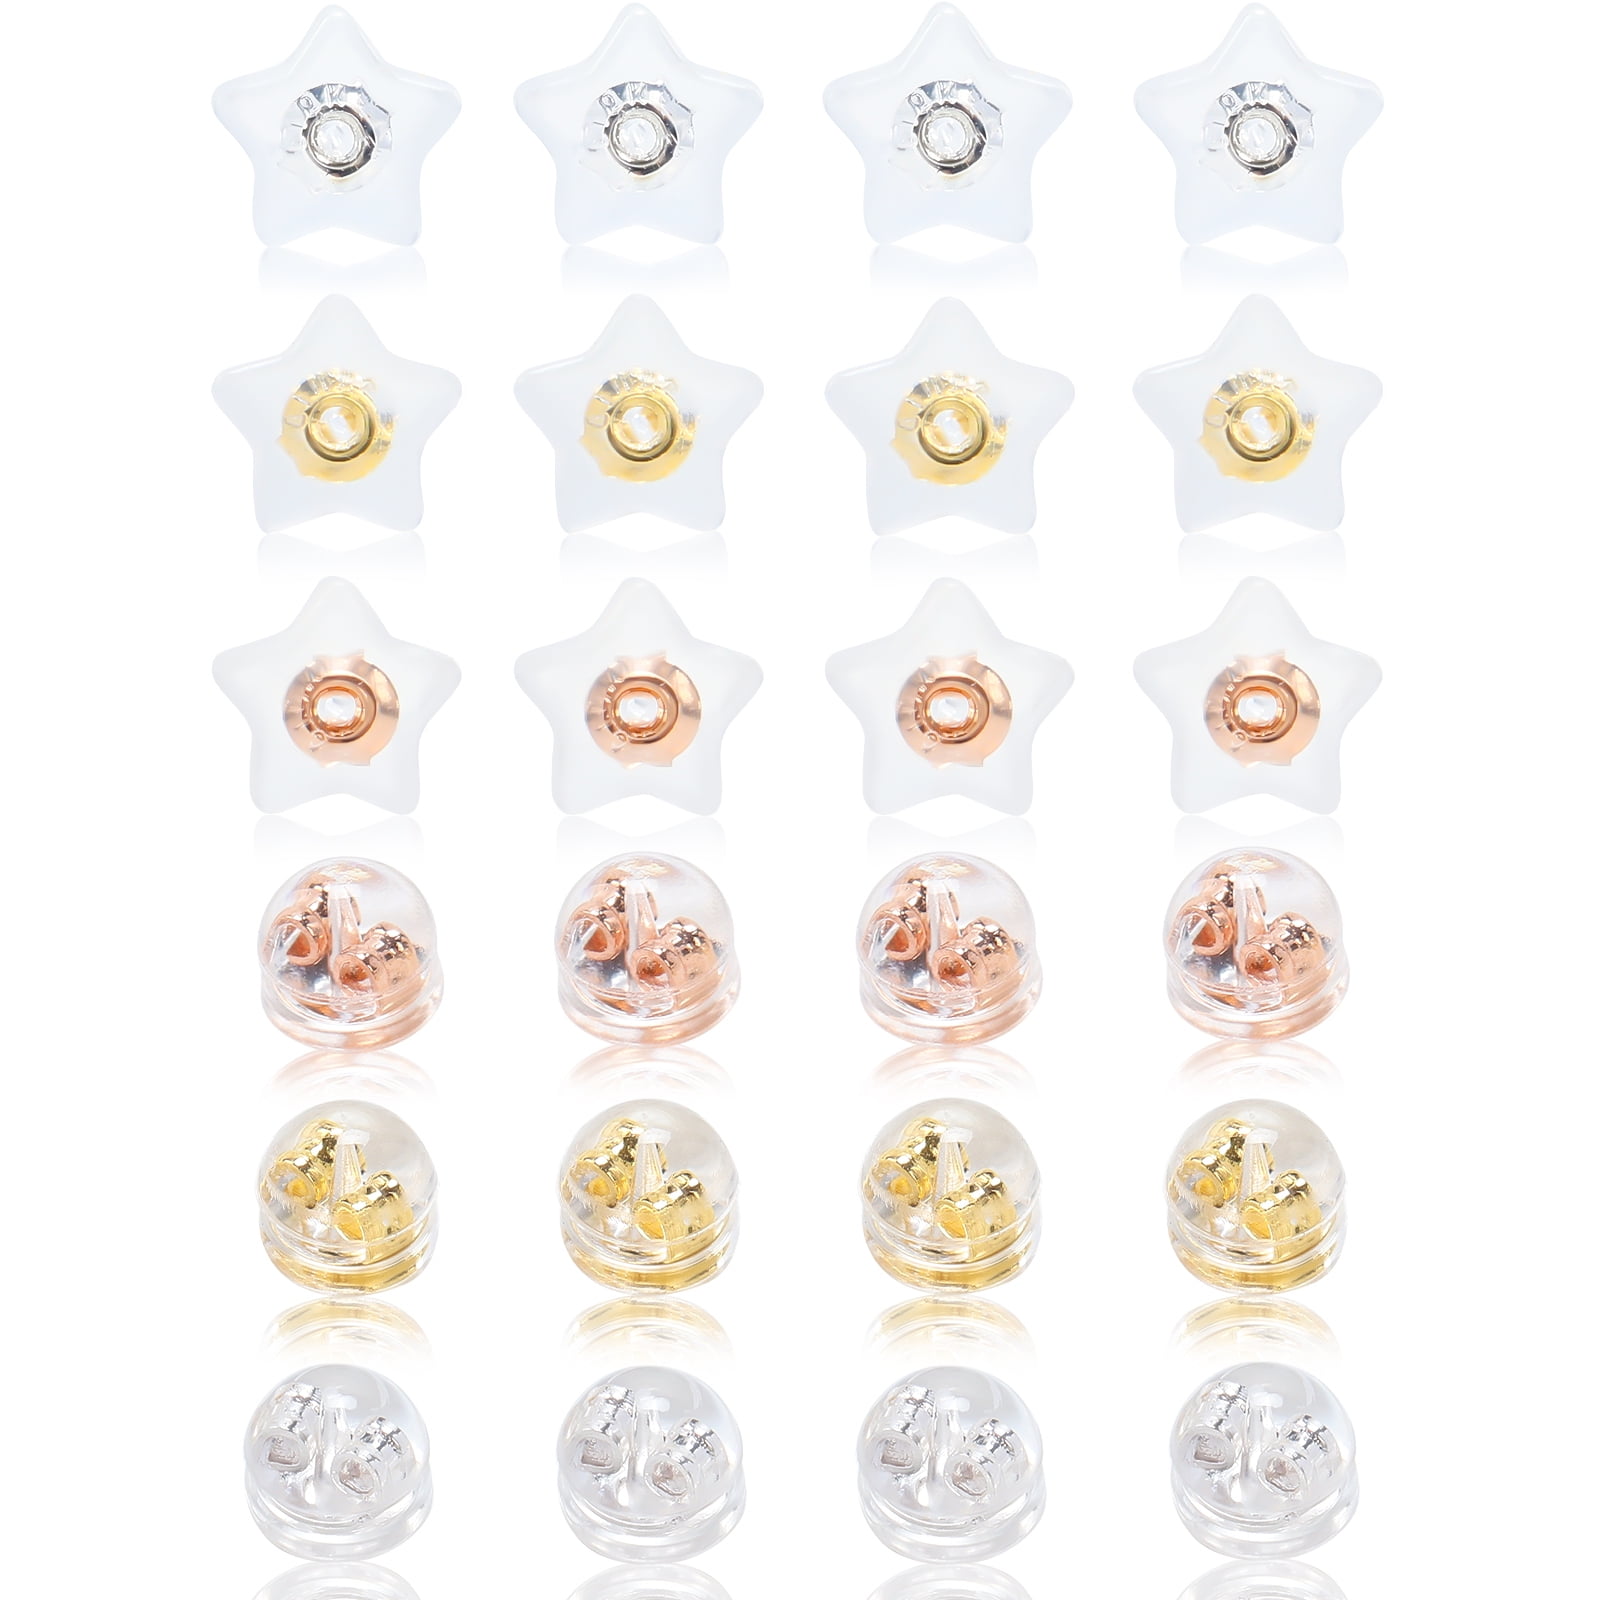 24 Pcs Silicone Earring Backs, 18K Gold Locking Secure Earring Backs for  Studs Droopy Fish Hook Heavy, 12 Pairs Hypoallergenic Comfy Soft Earring